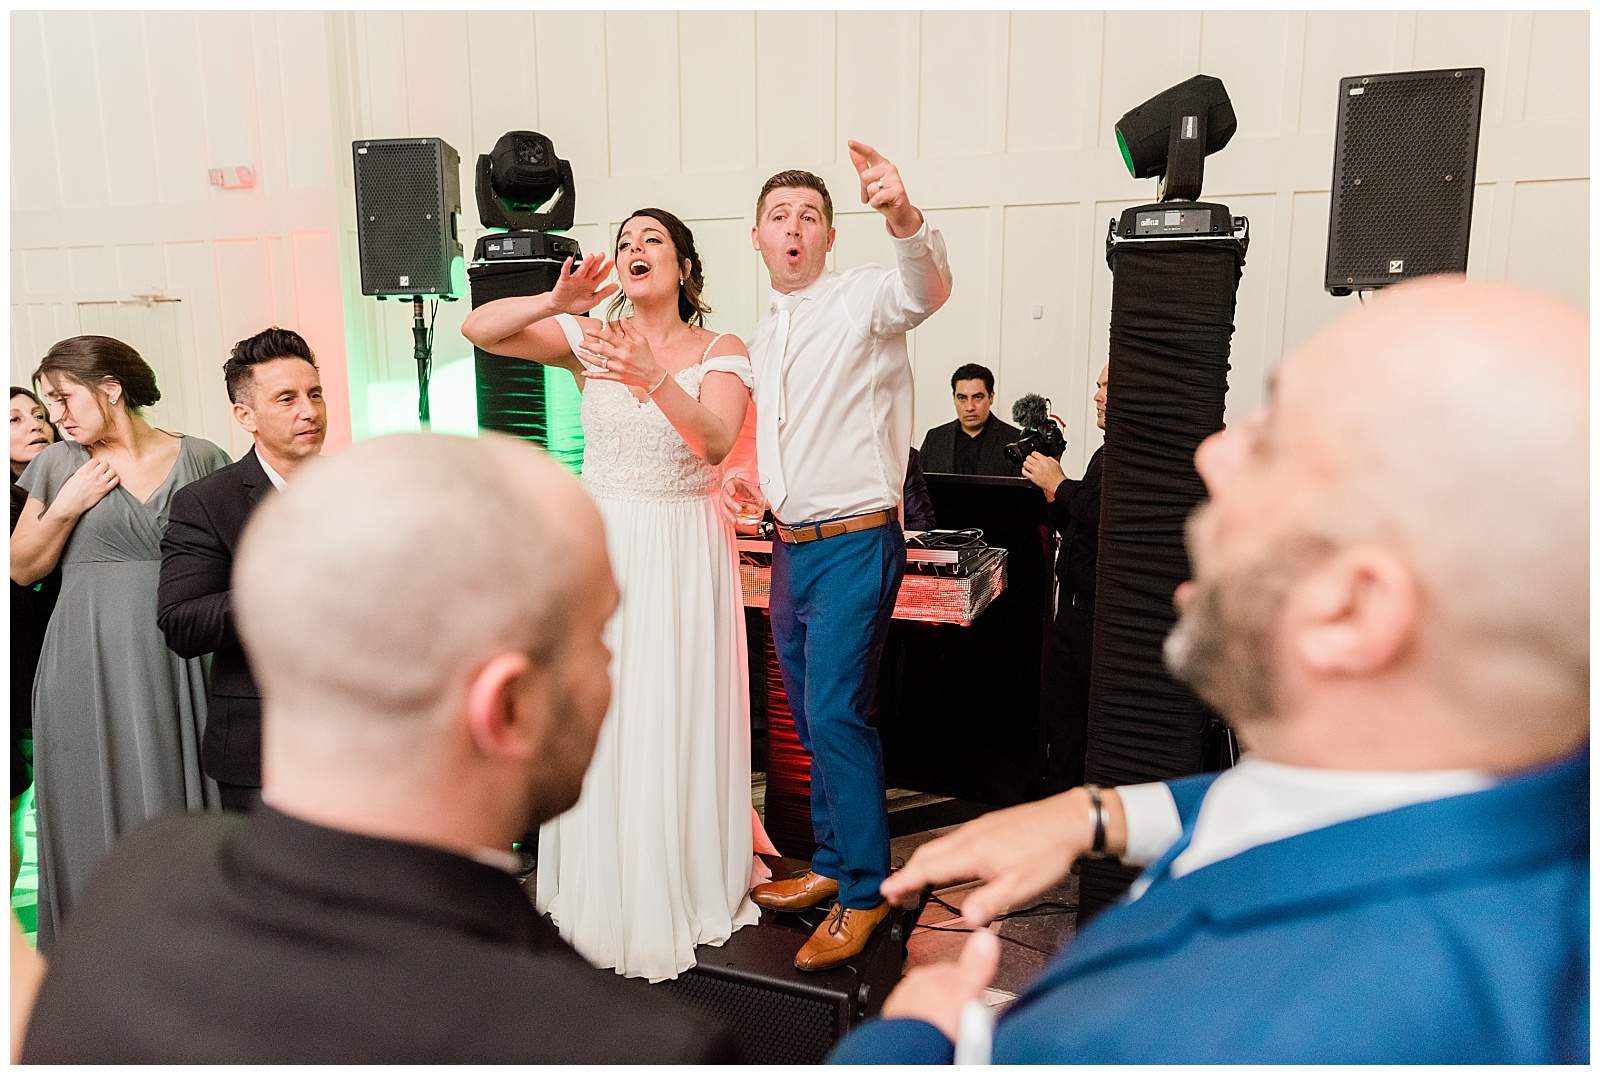 Bride and groom dance on a speaker in front of the DJ booth during the reception.